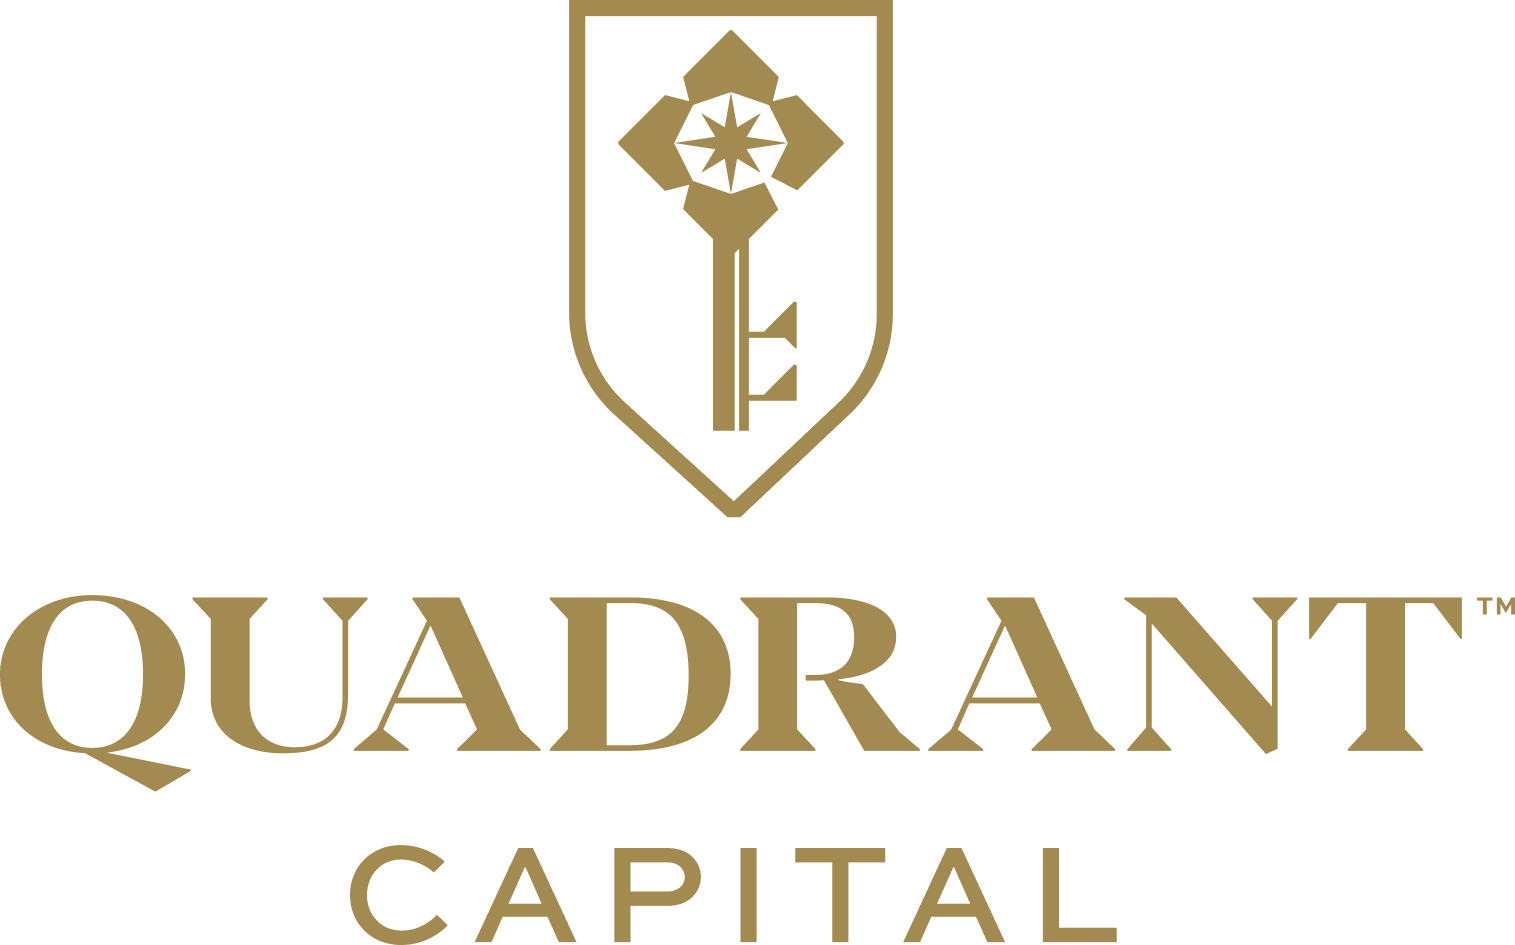 Quadrant Capital Clients at the Forefront of a Transformative Brand and Leadership Progression